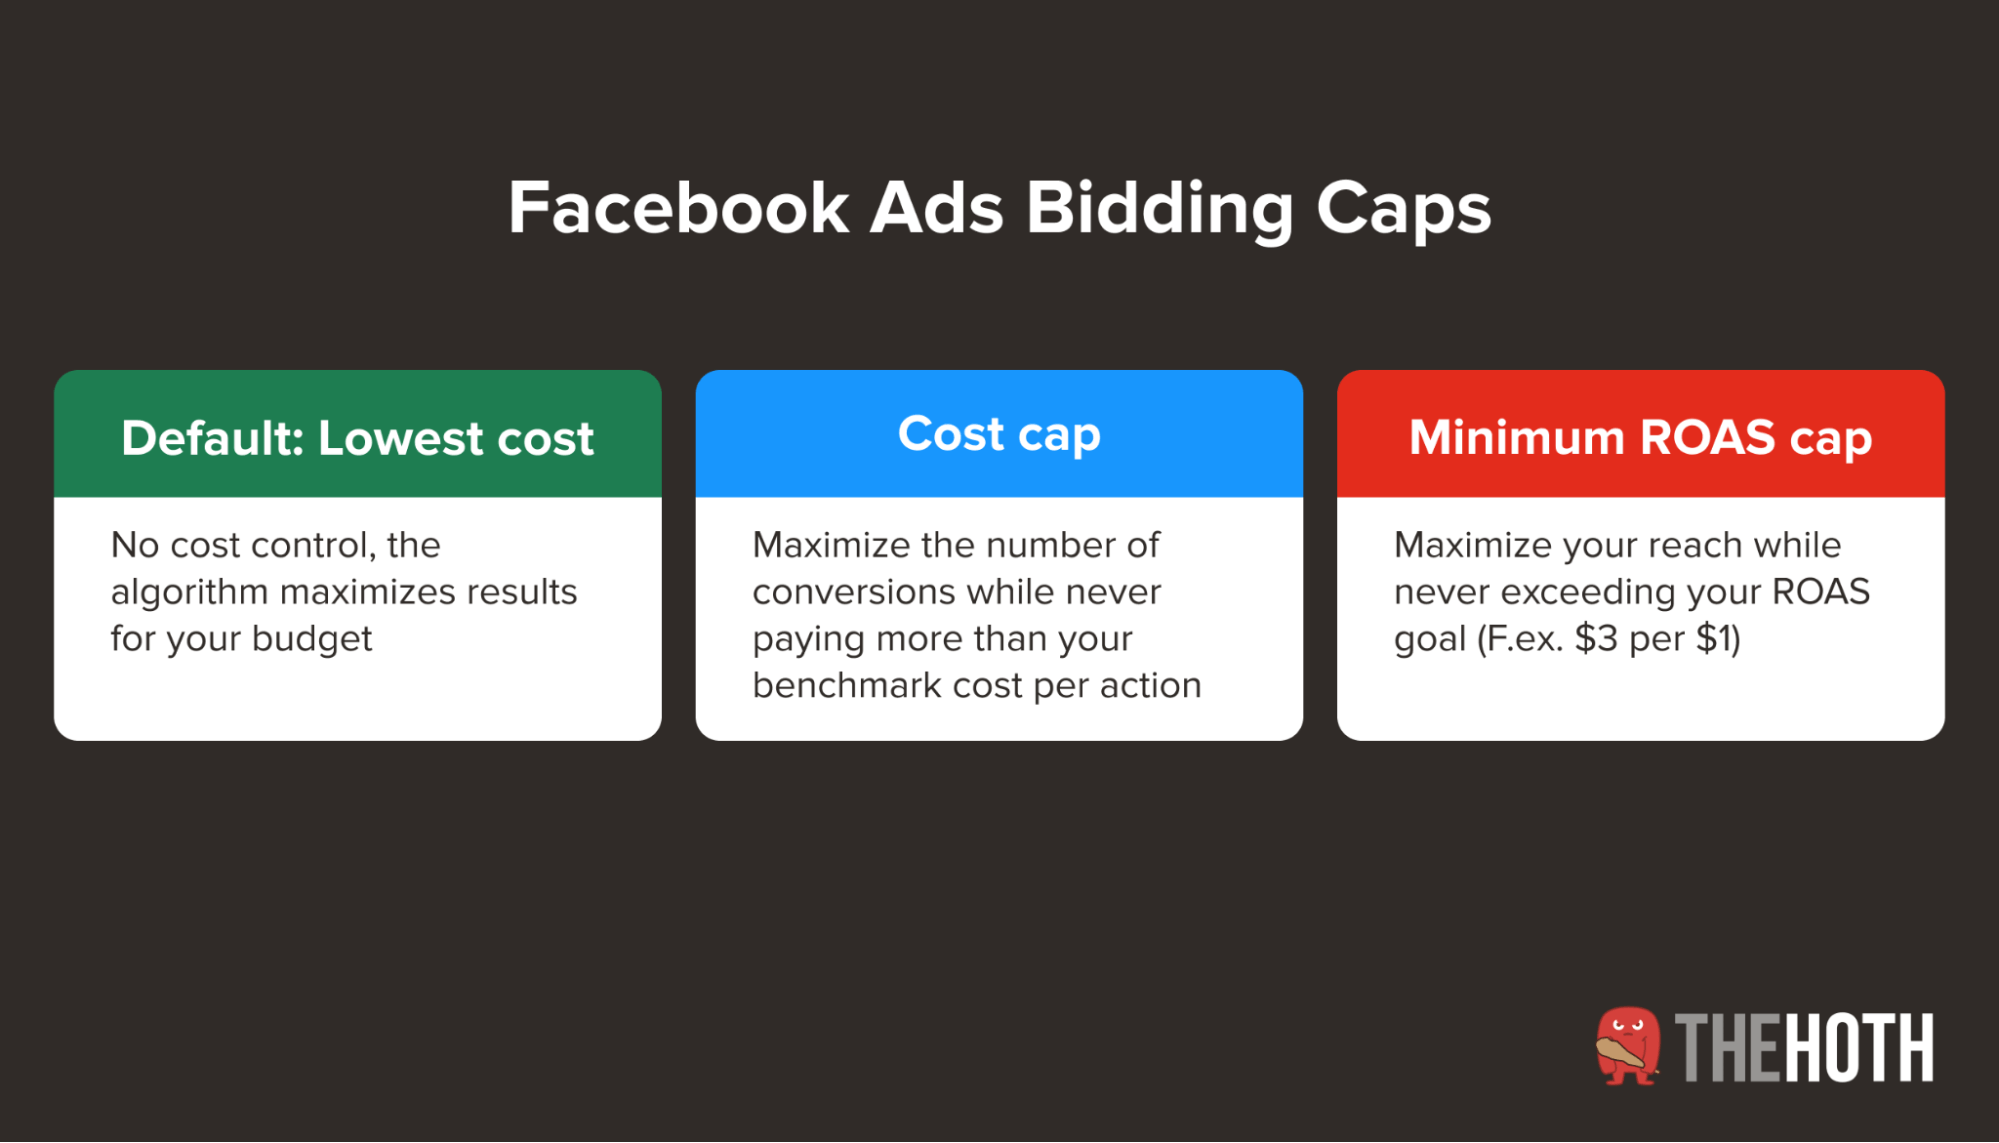 Options for capping bids in Facebook ads